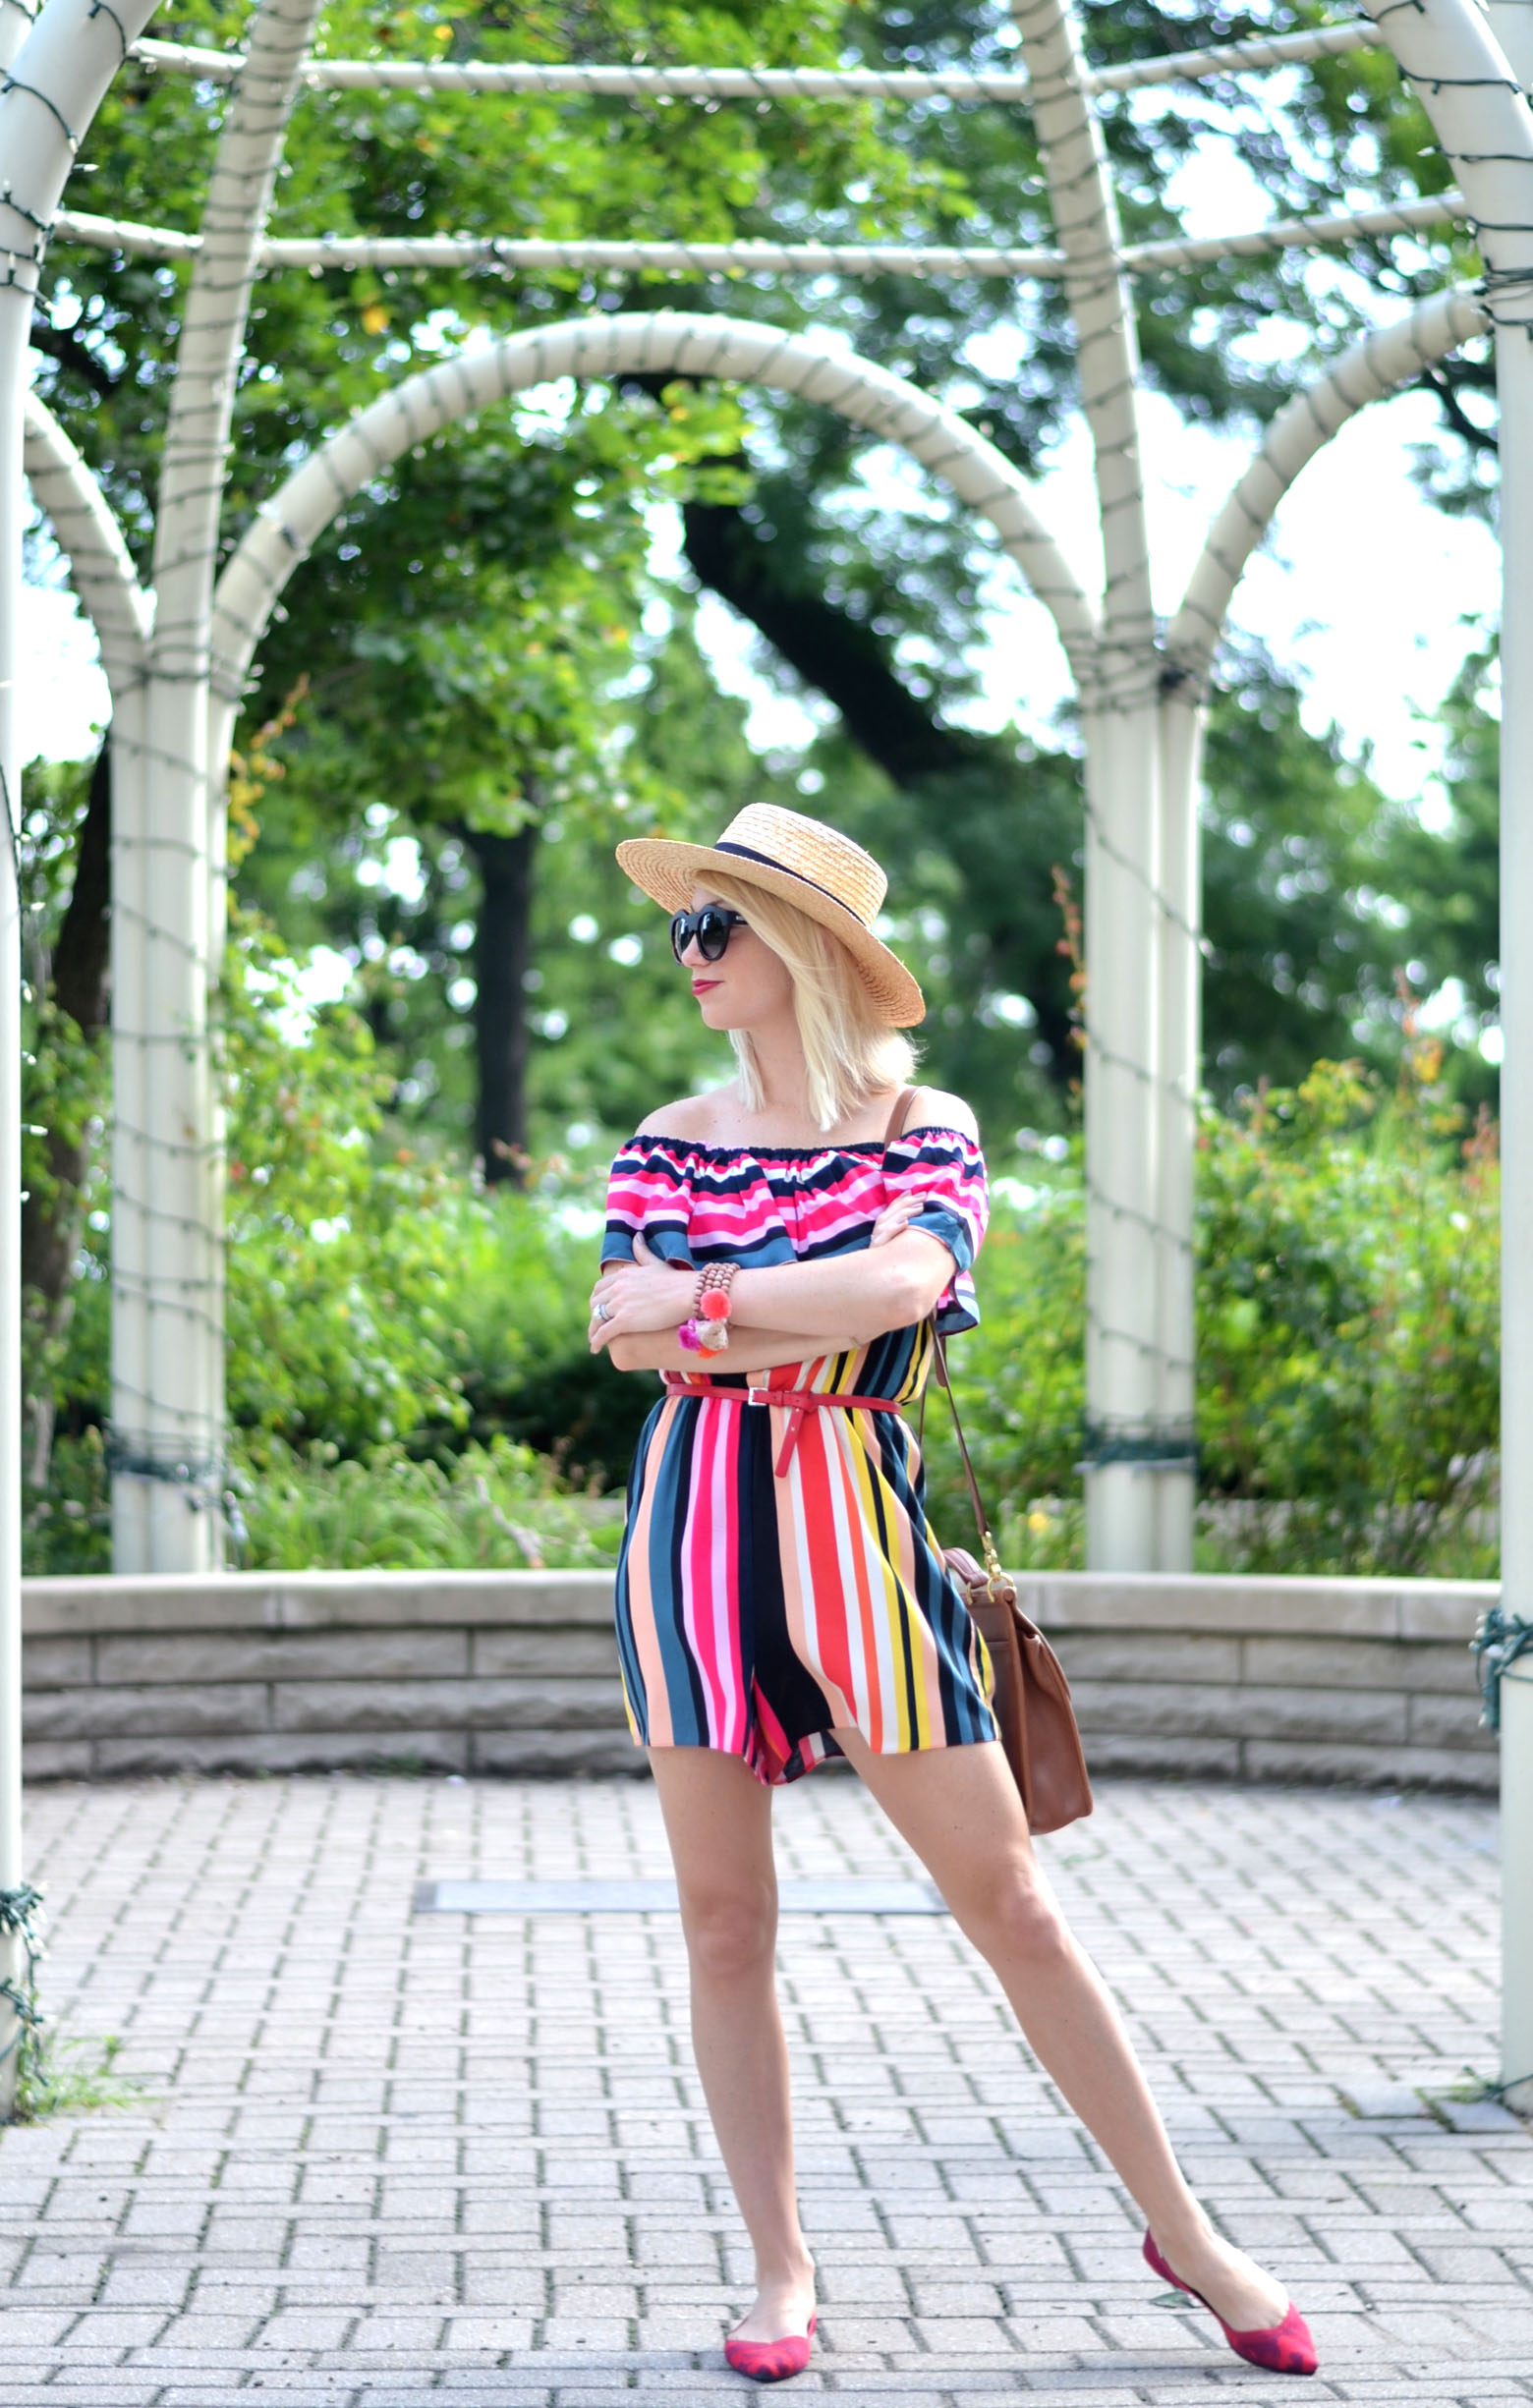 stefanie schoen of the style safari wears red camo seemless knit Rothys flats and Striped ASOS romper